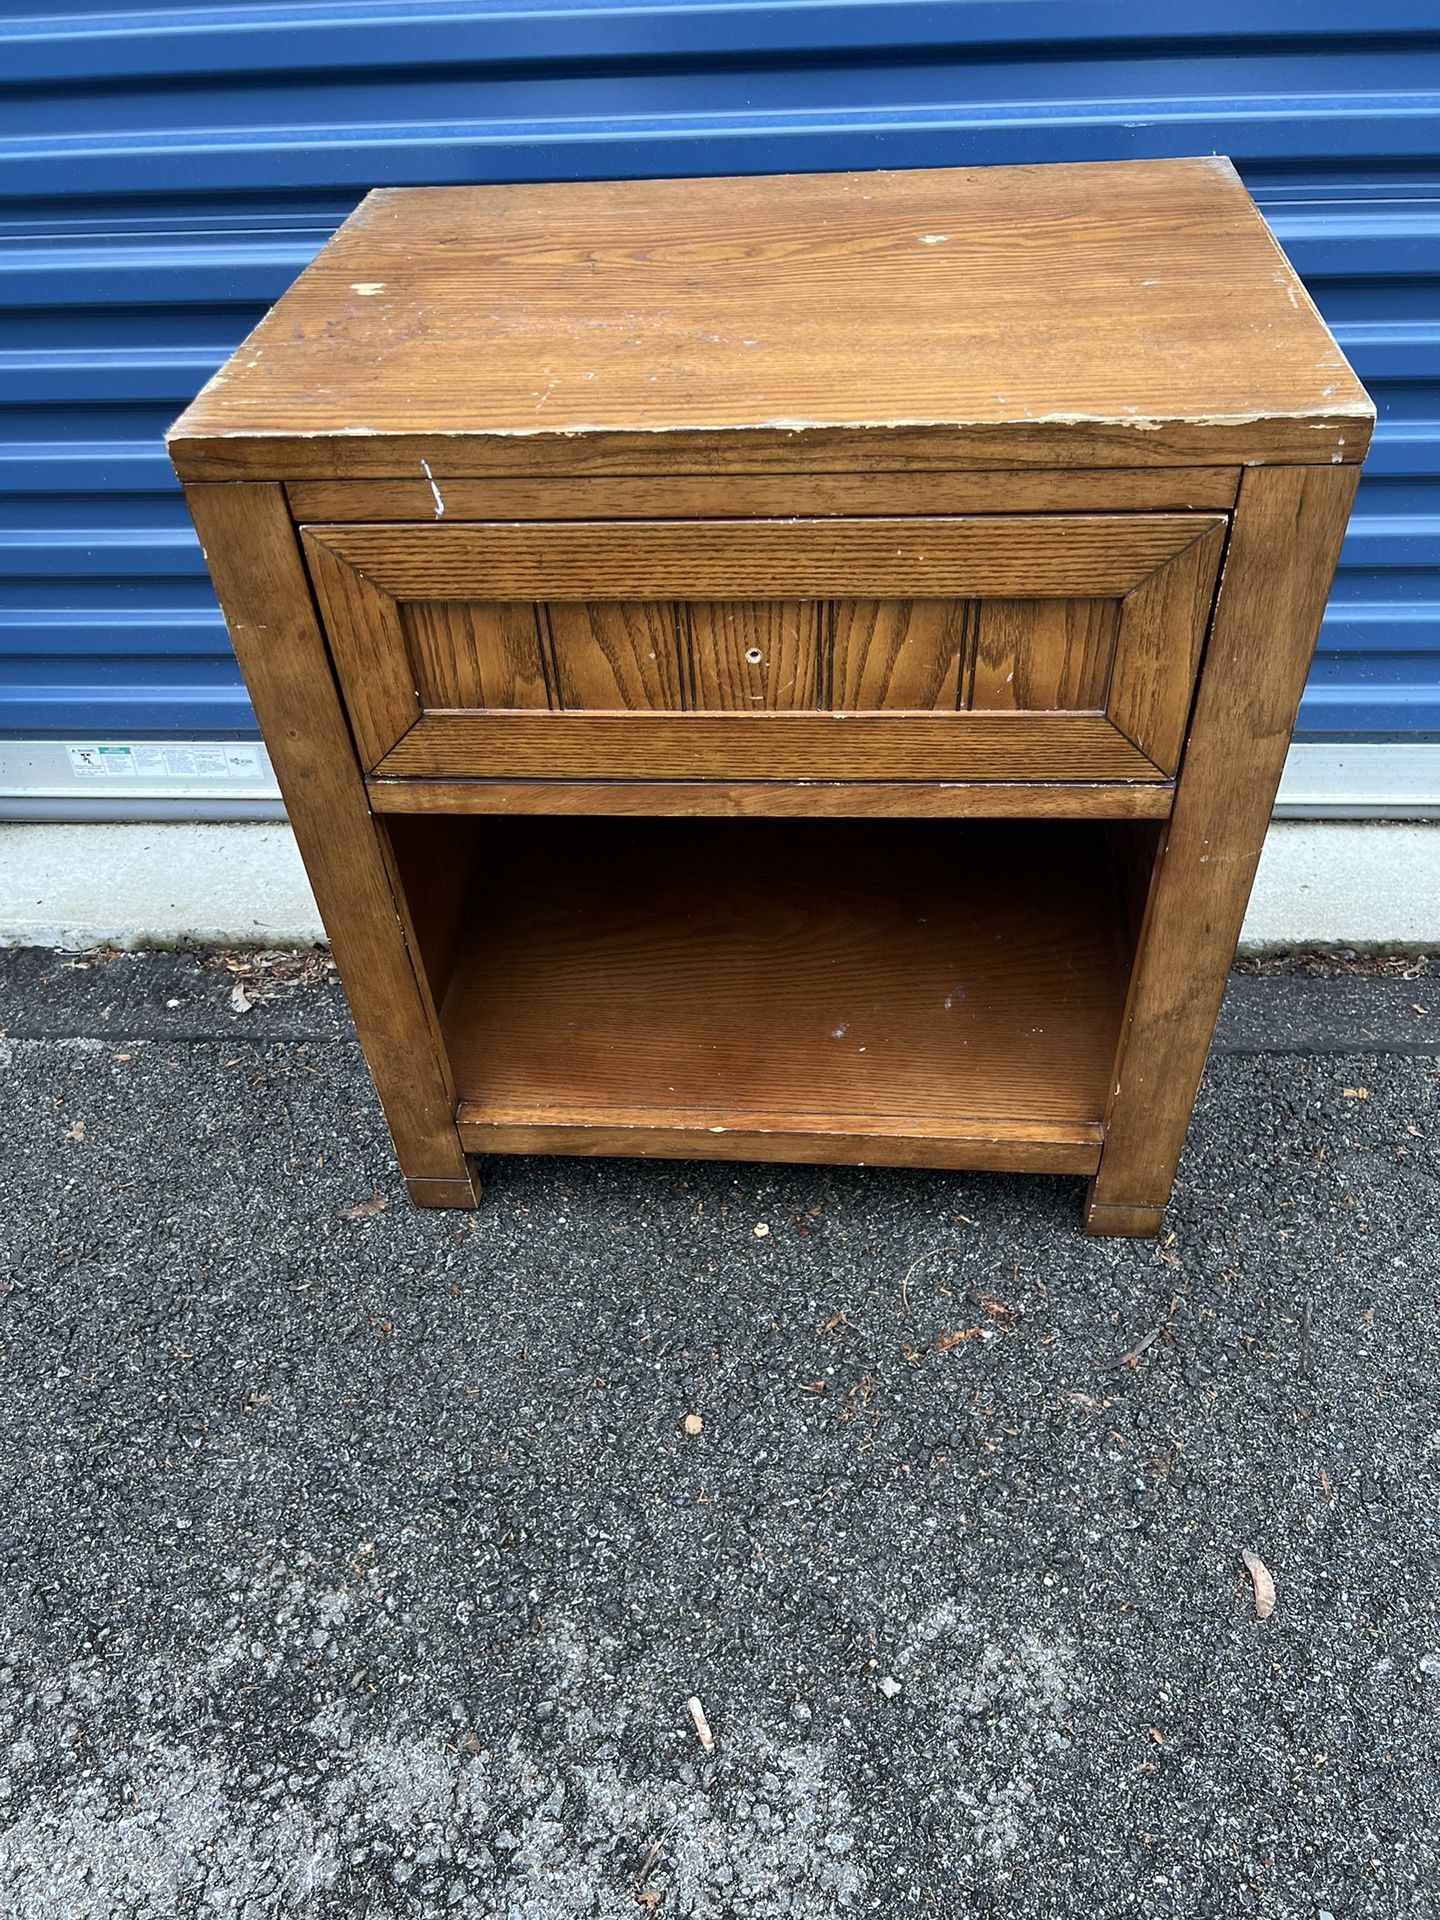 Wooden Nightstand, Needs Painted or Refinishing  Nightstand  24 “ wide  17” deep  26” tall 